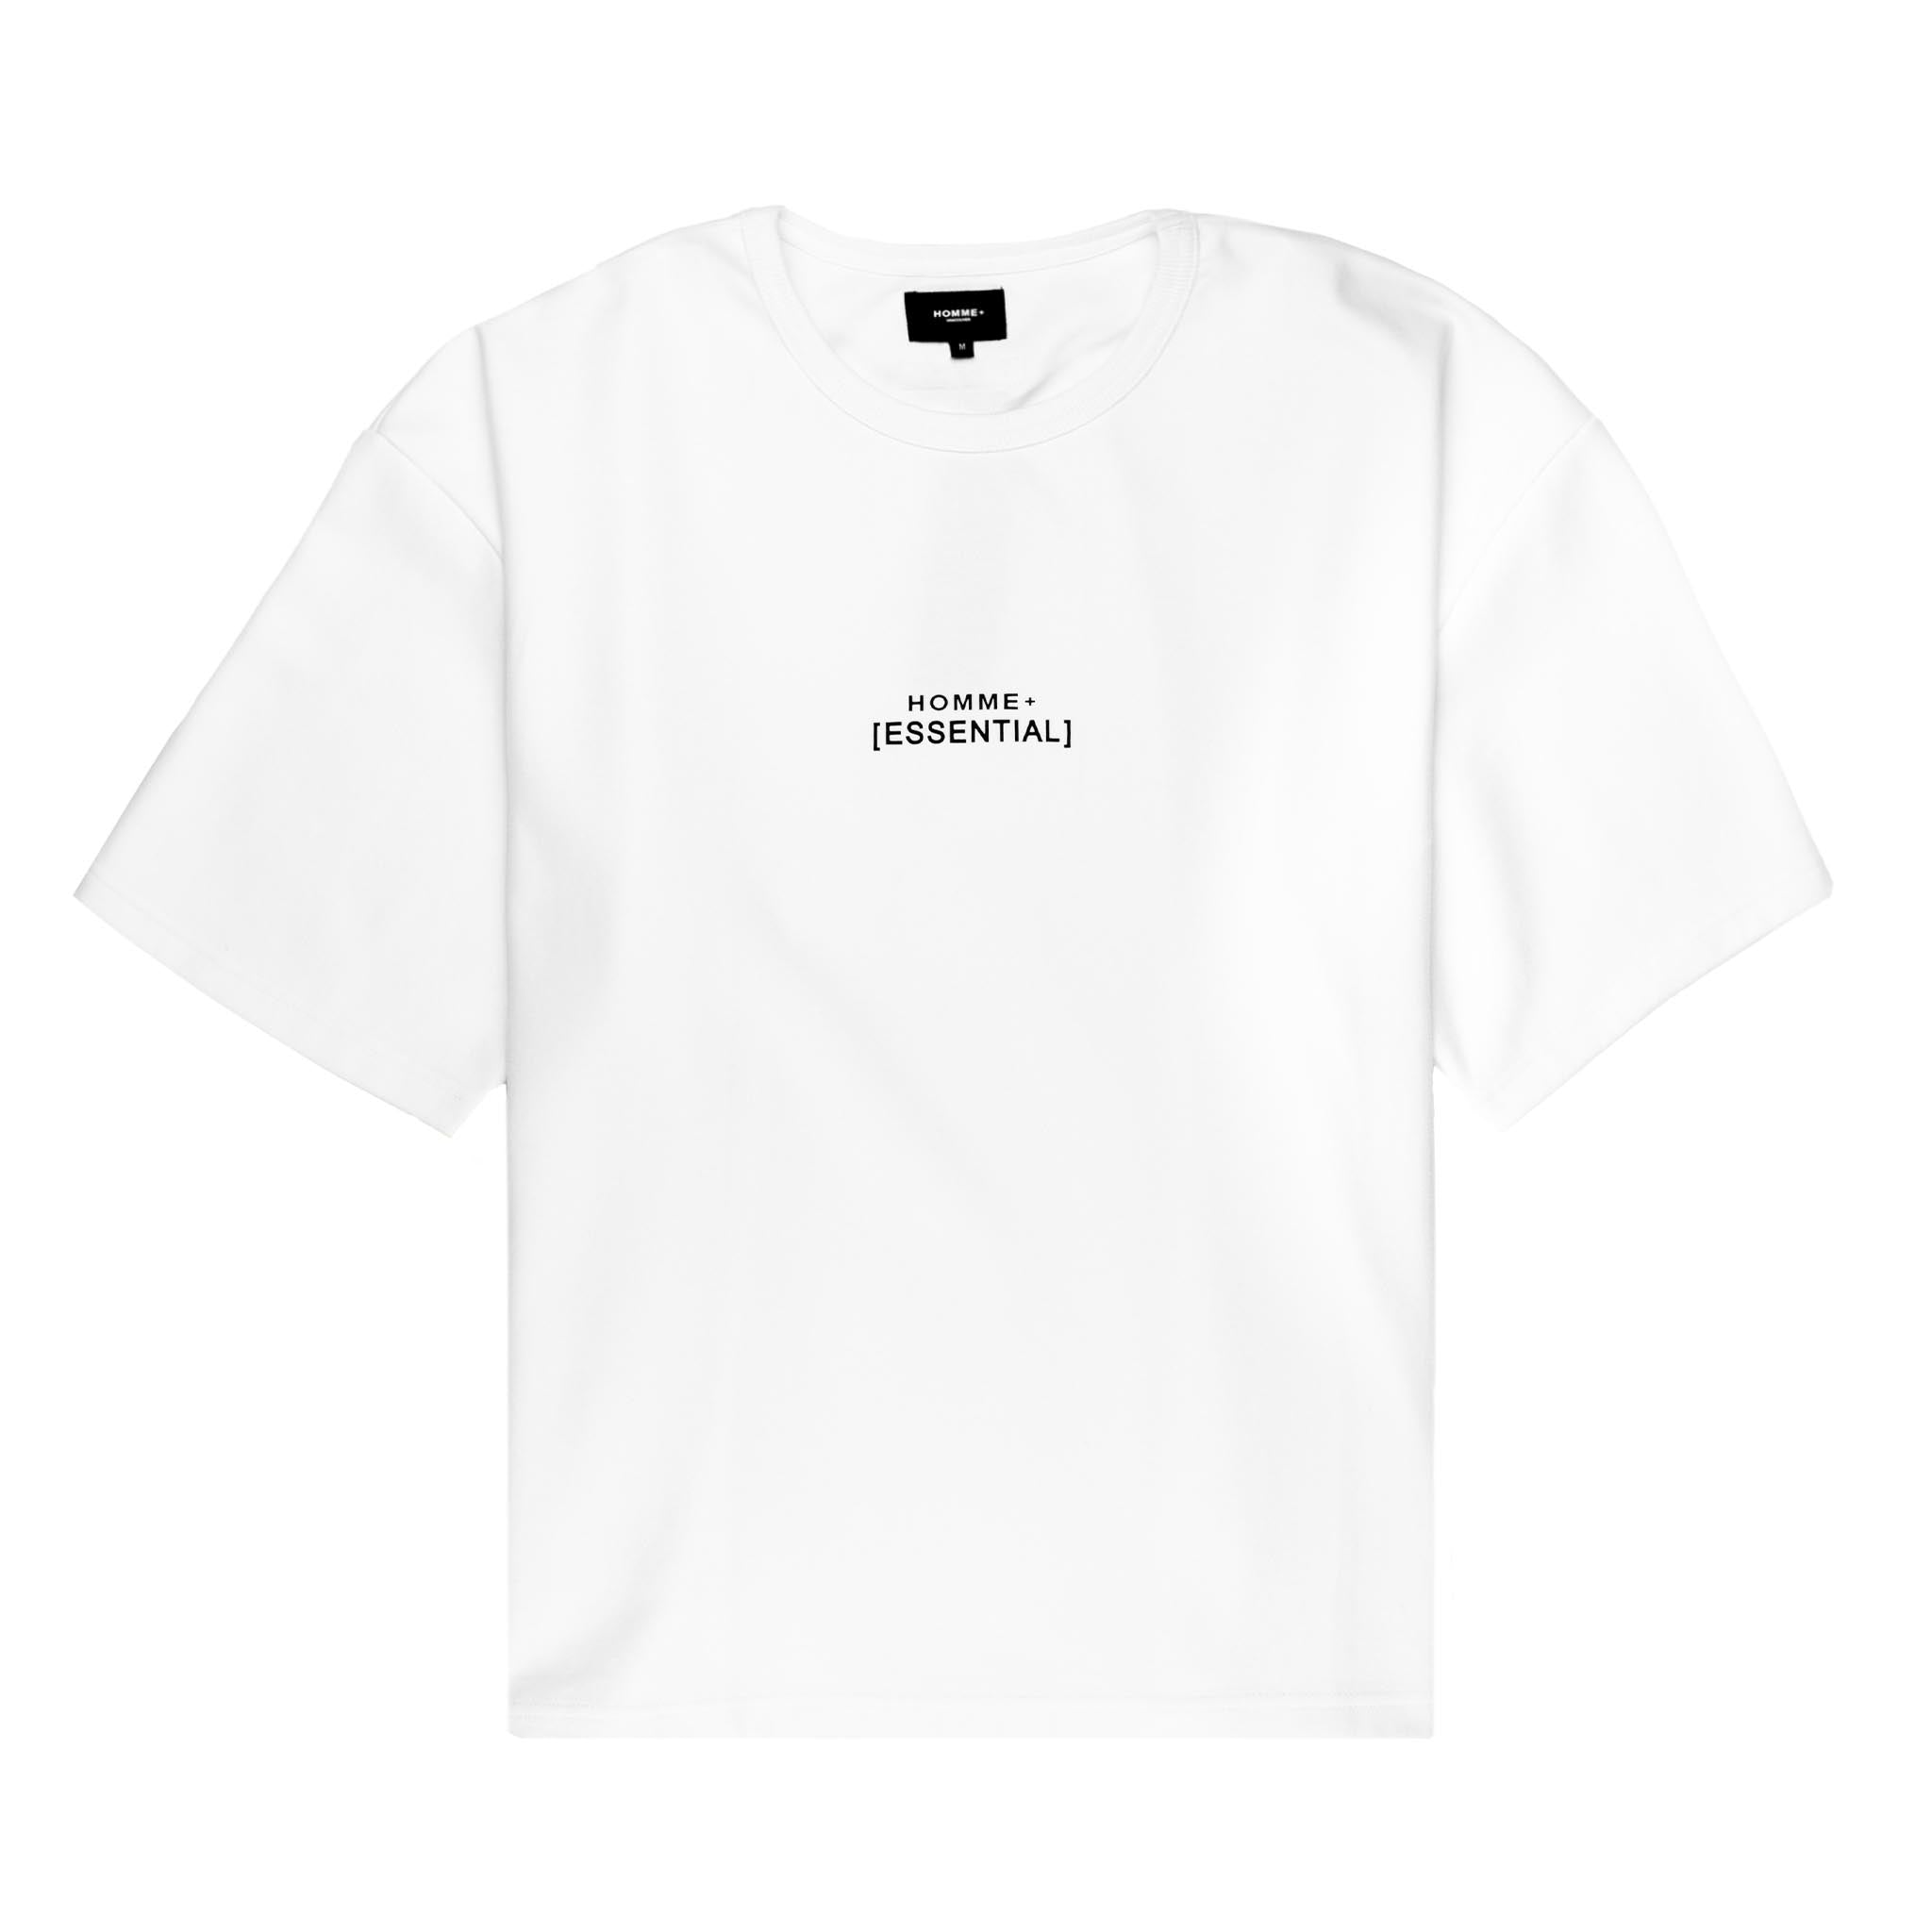 HOMME+ 'ESSENTIAL' Side Taping Tee White